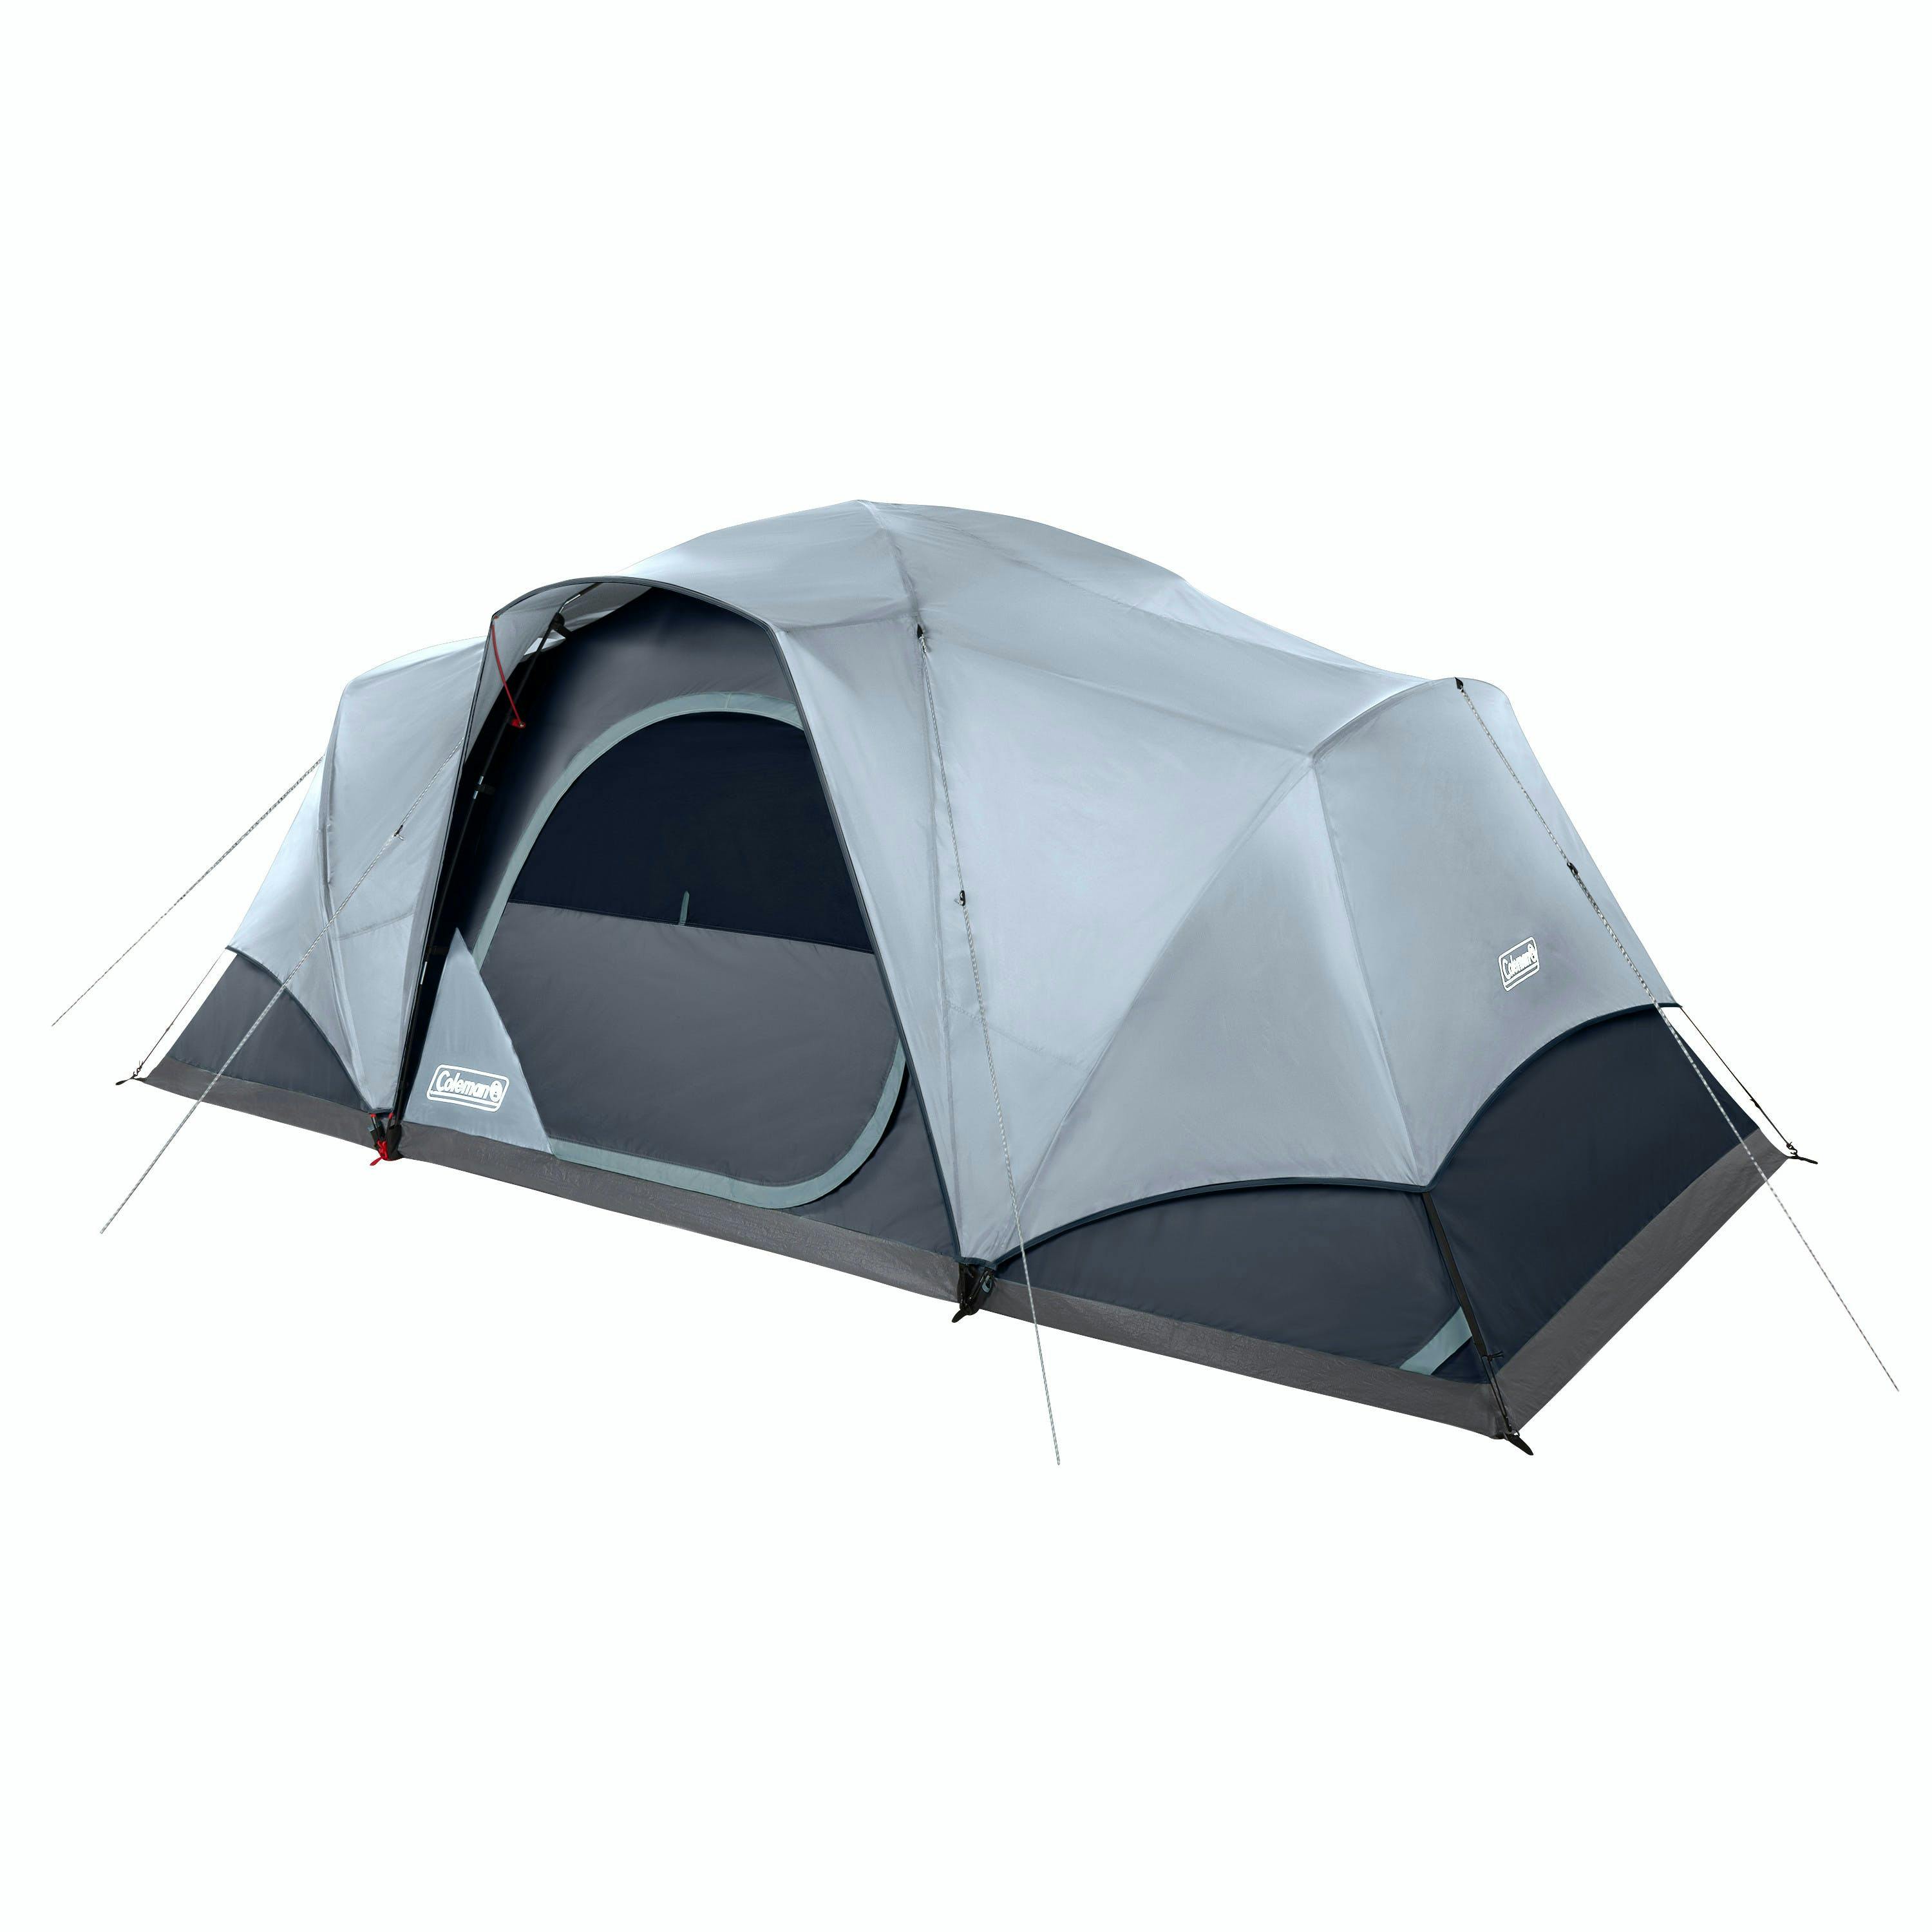 Kindercentrum streepje architect Coleman Skydome XL Camping Tent with LED Lighting | Curated.com